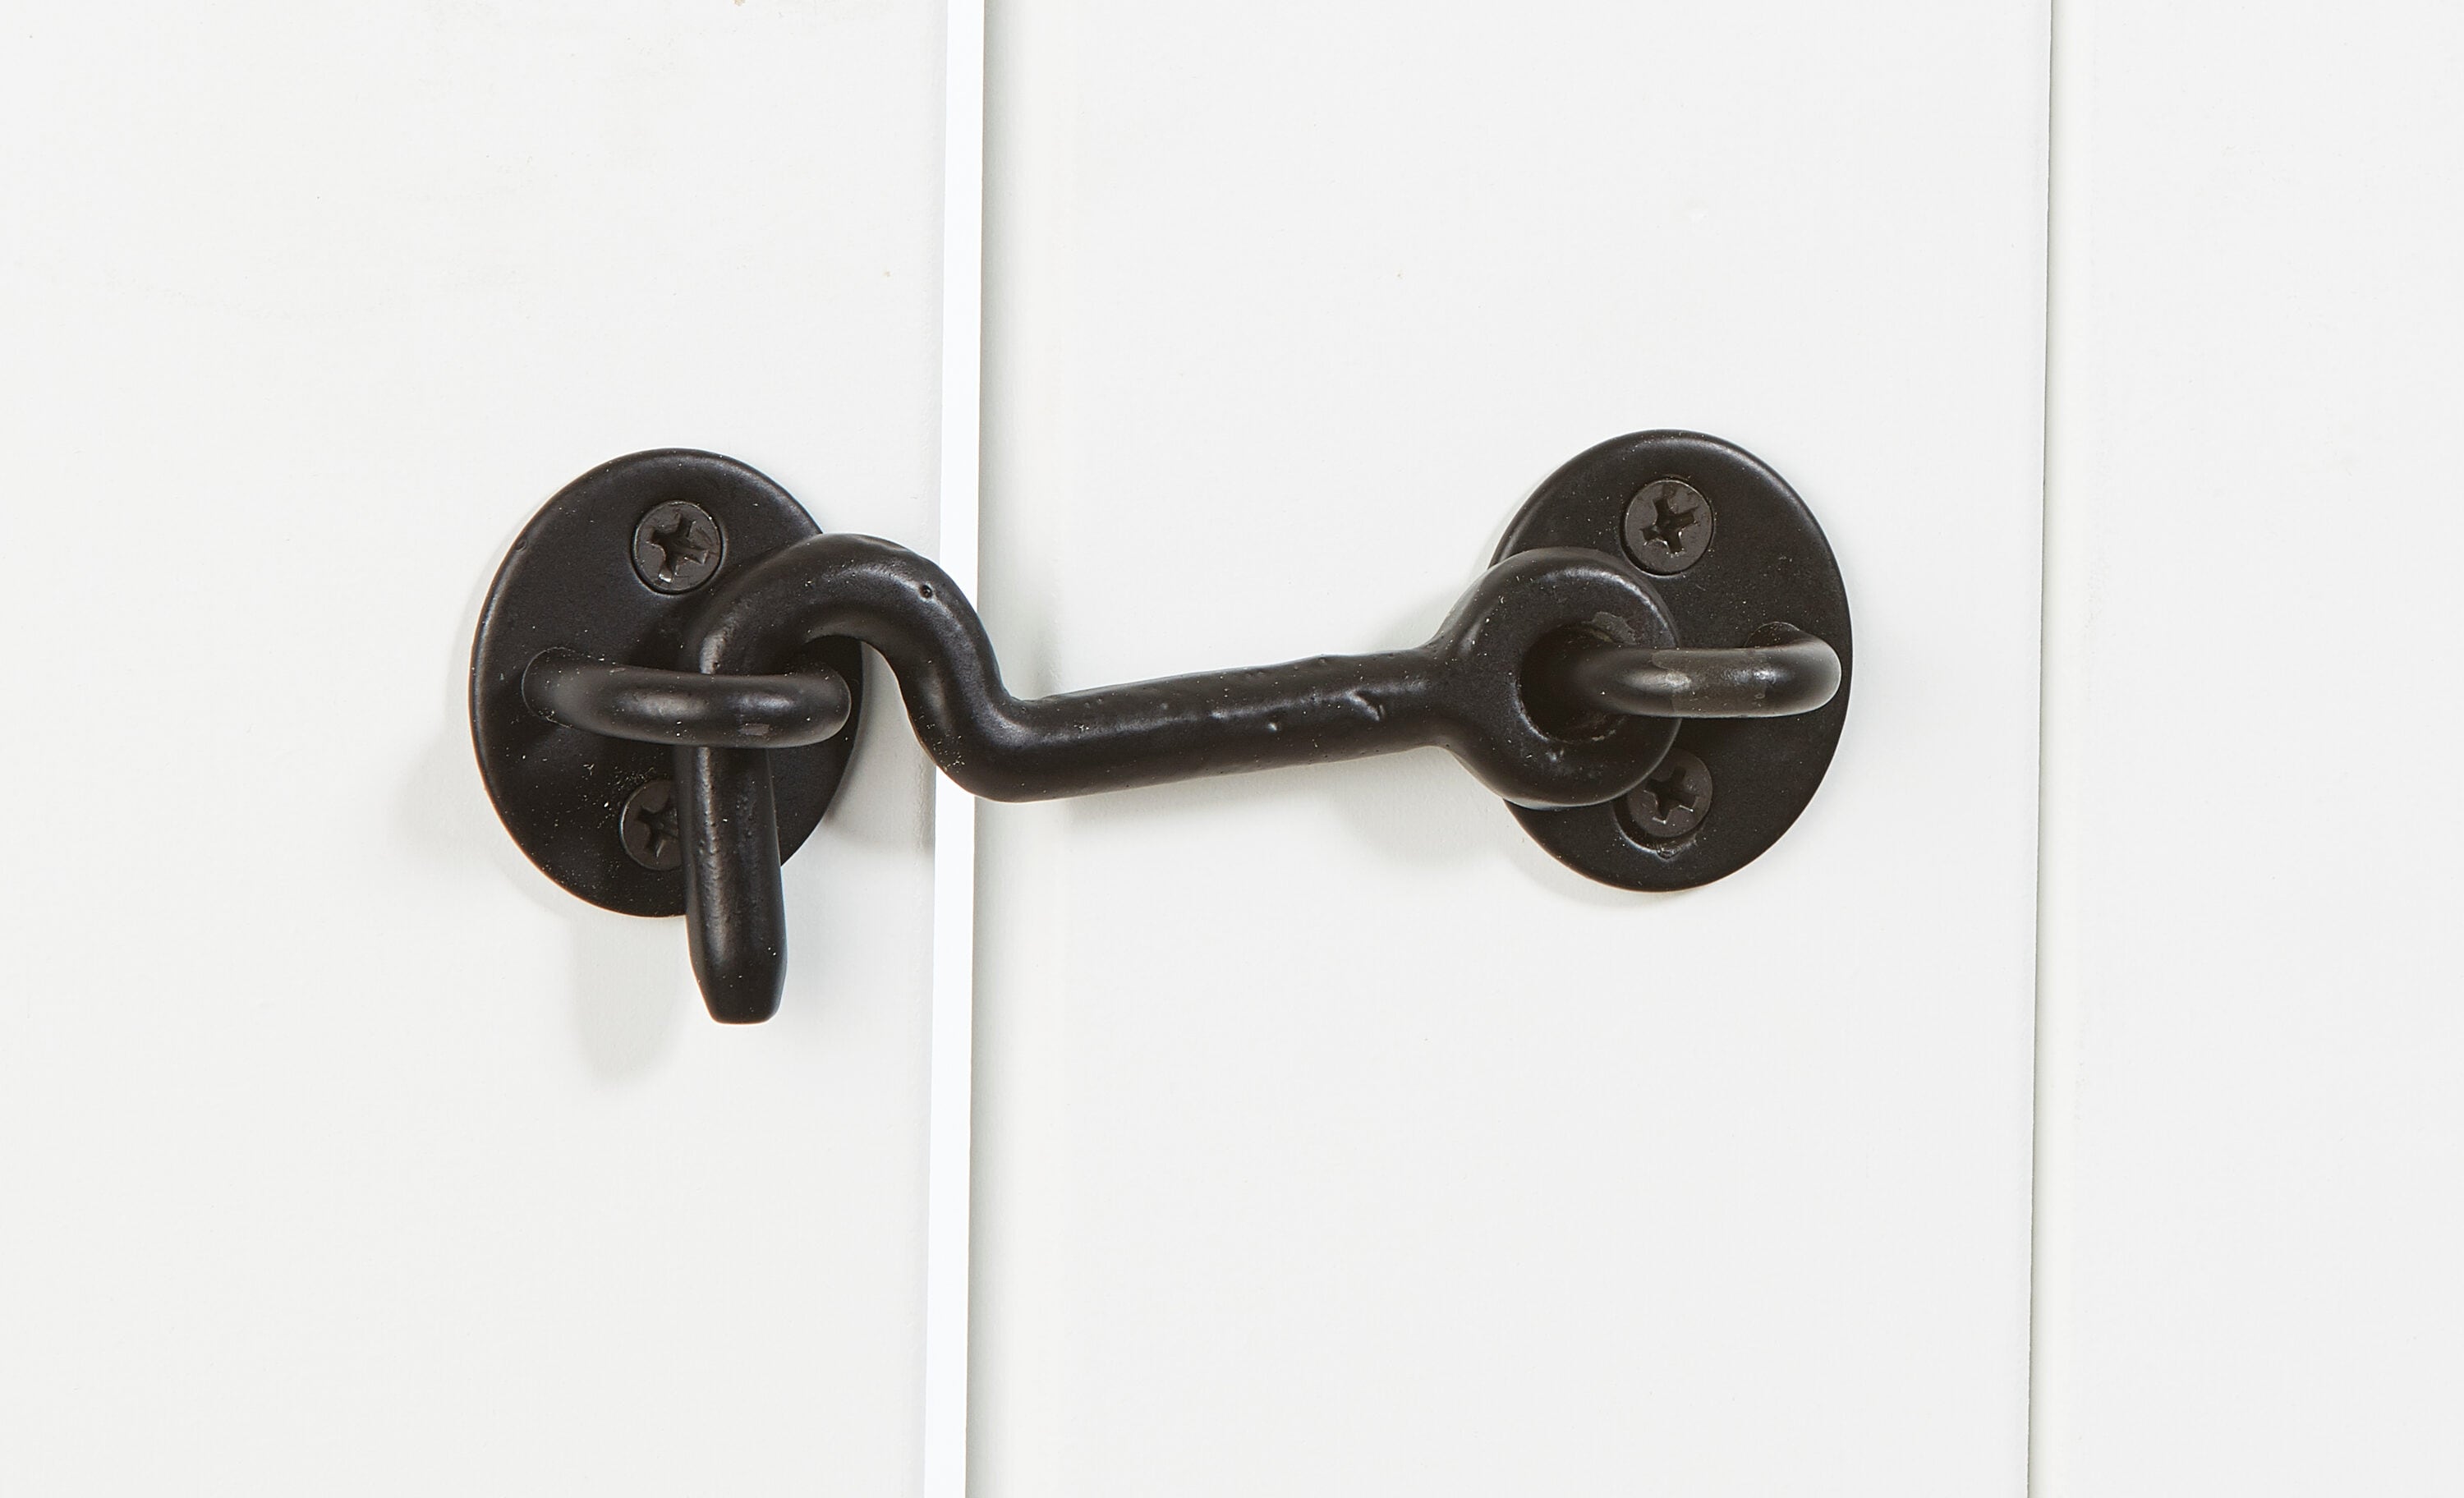 RELIABILT 0.87-in Oil-Rubbed Bronze Steel Gate Hook and Eye in the